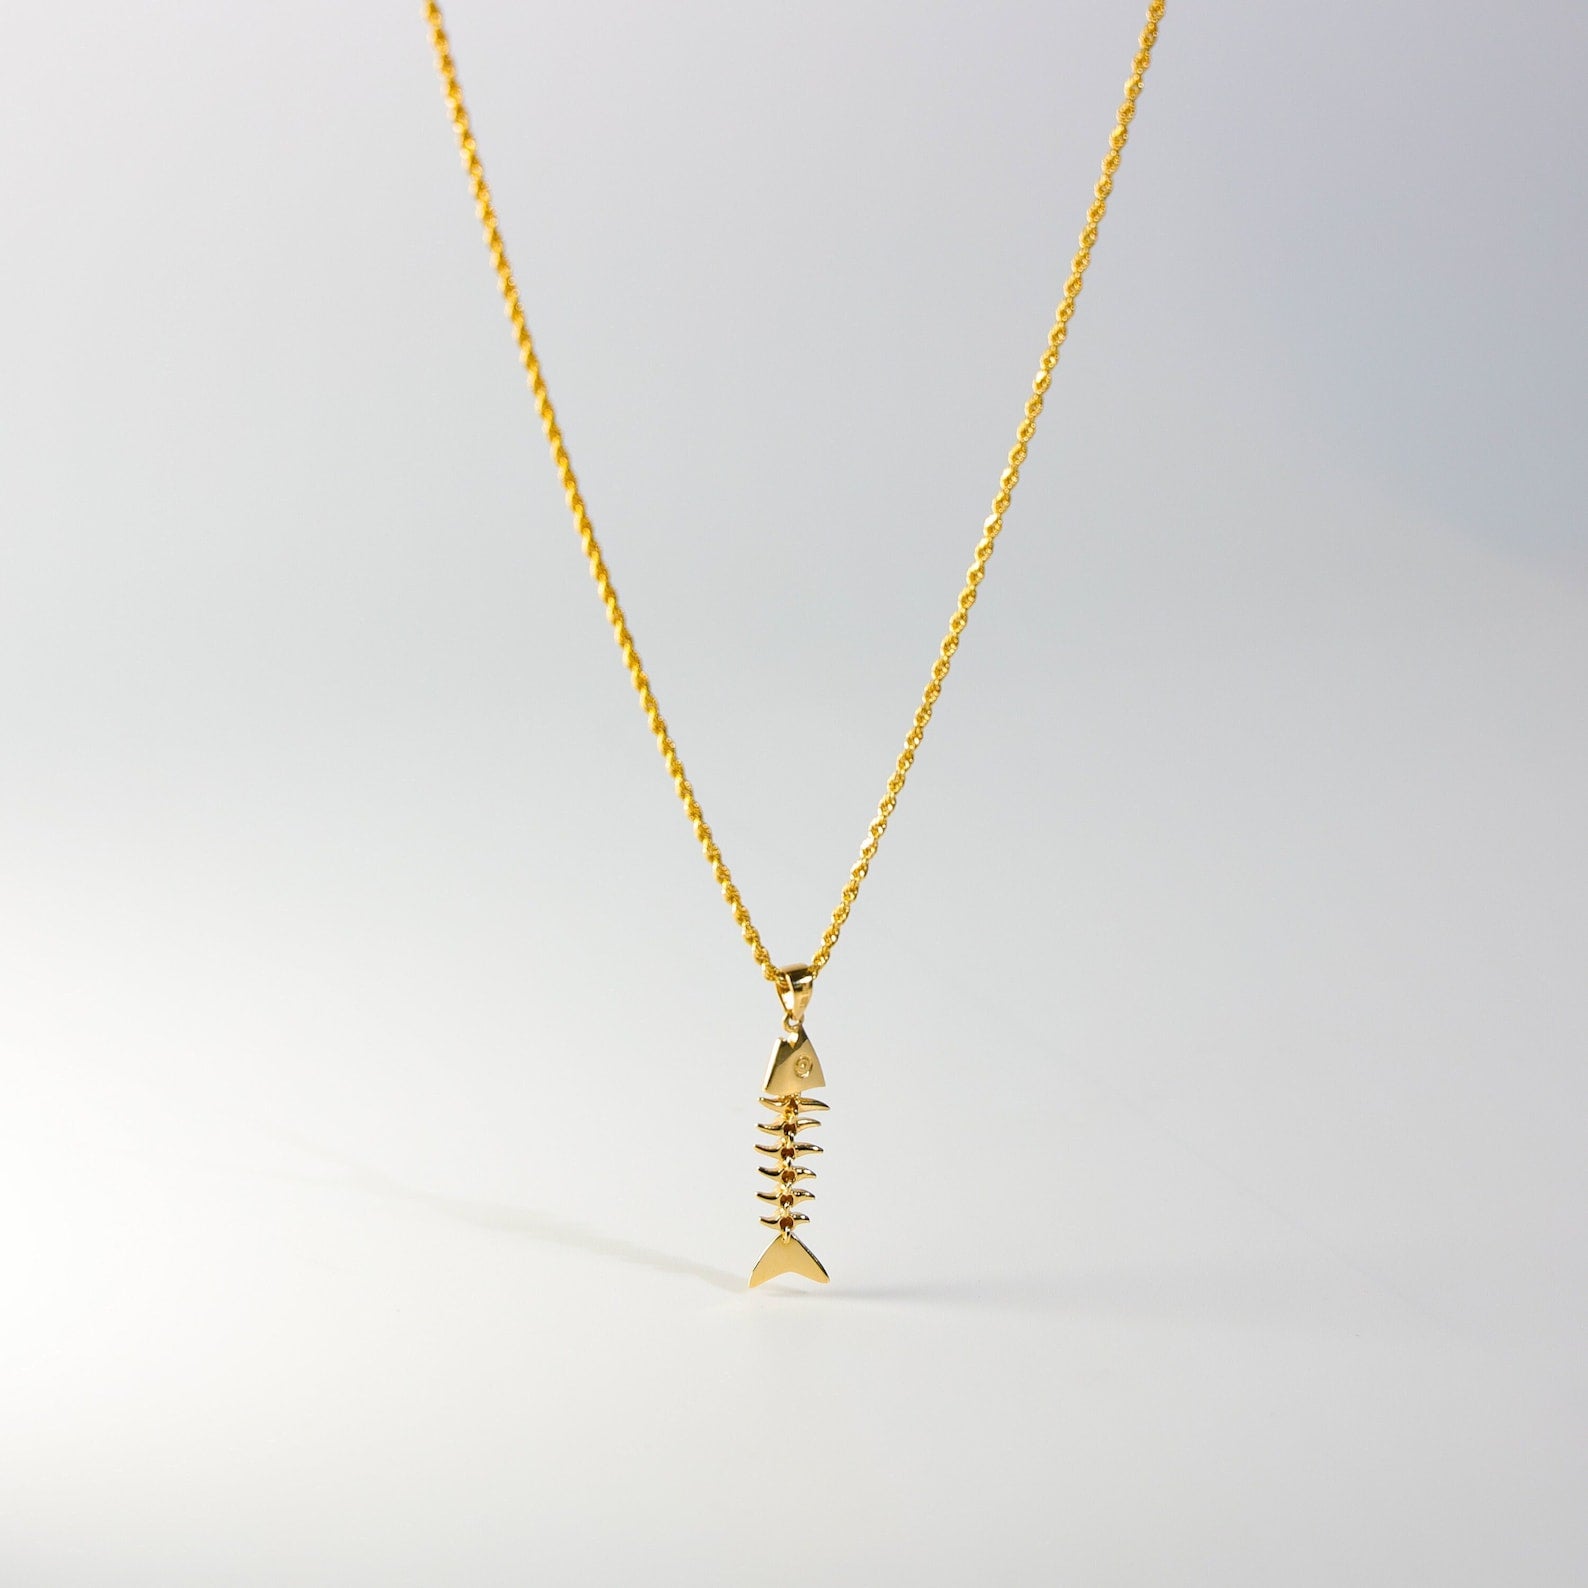 Adorable Motion Fish Bone Gold Pendant - Charlie & Co. Jewelry